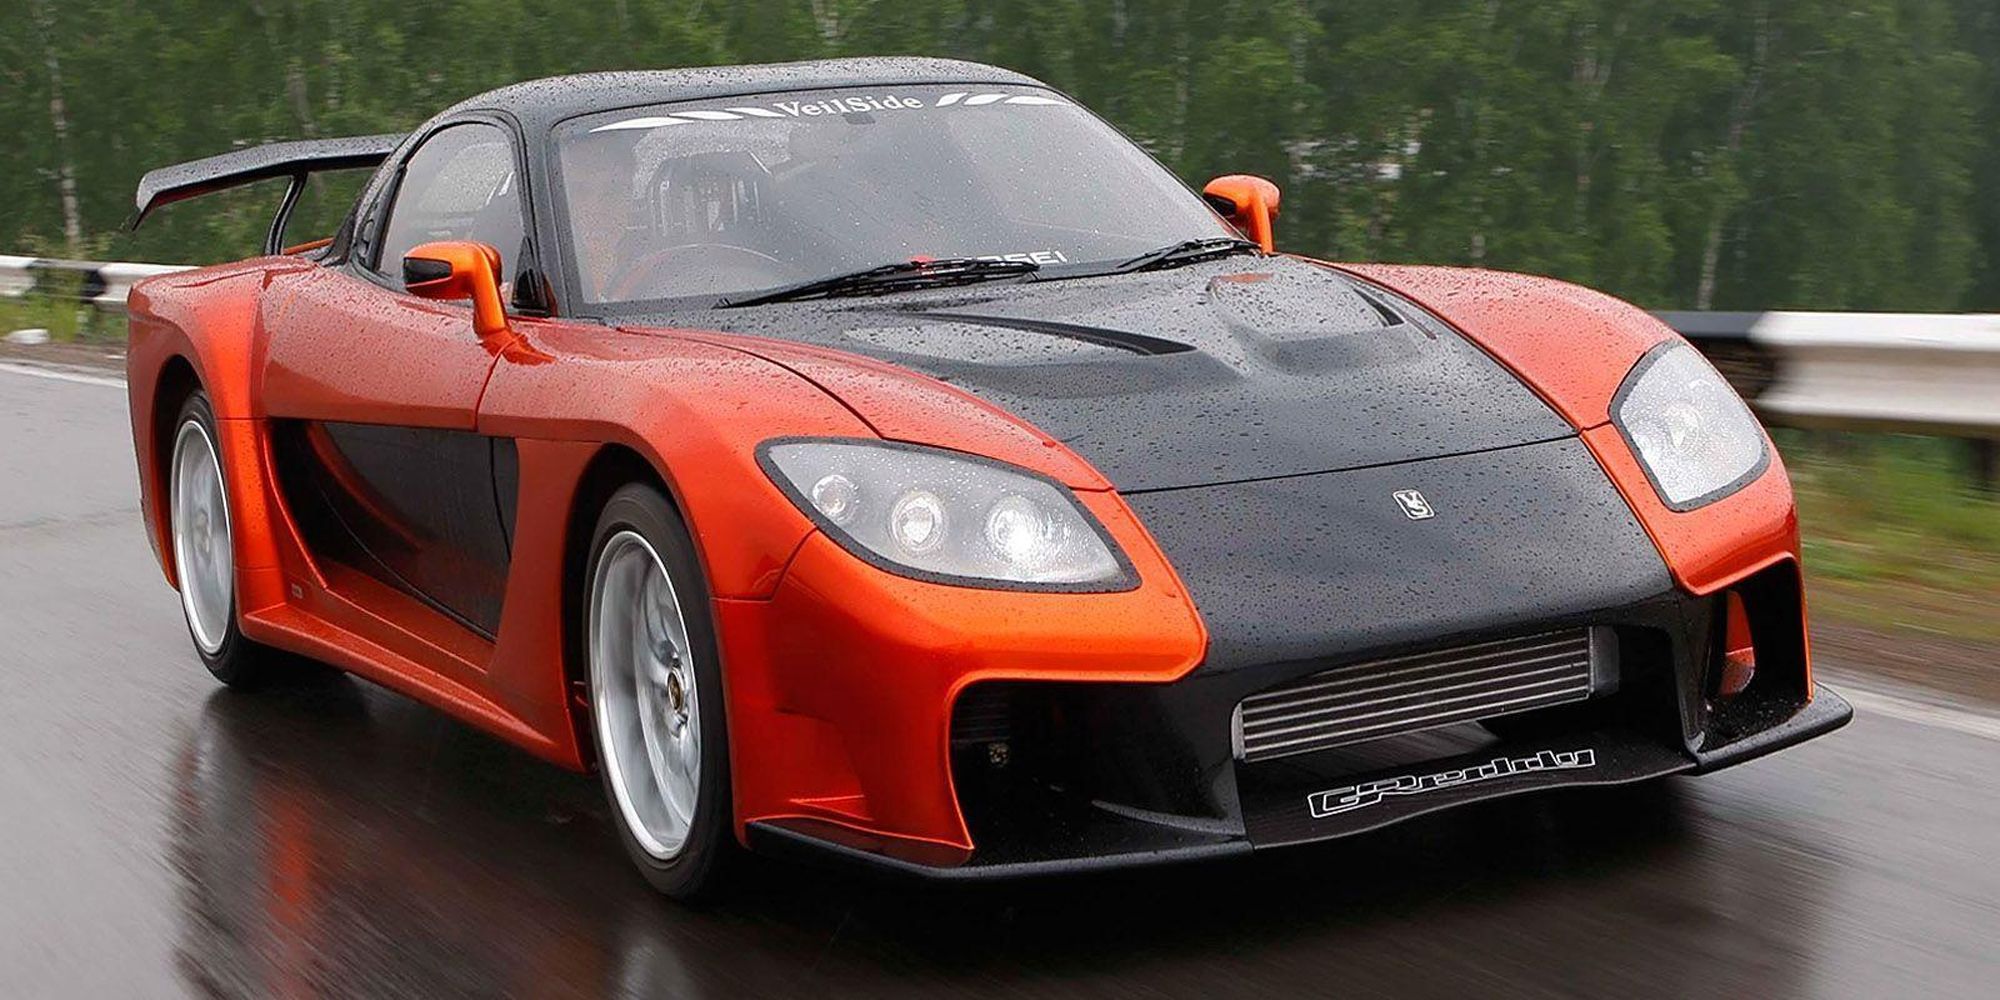 The front of the Fortune RX7